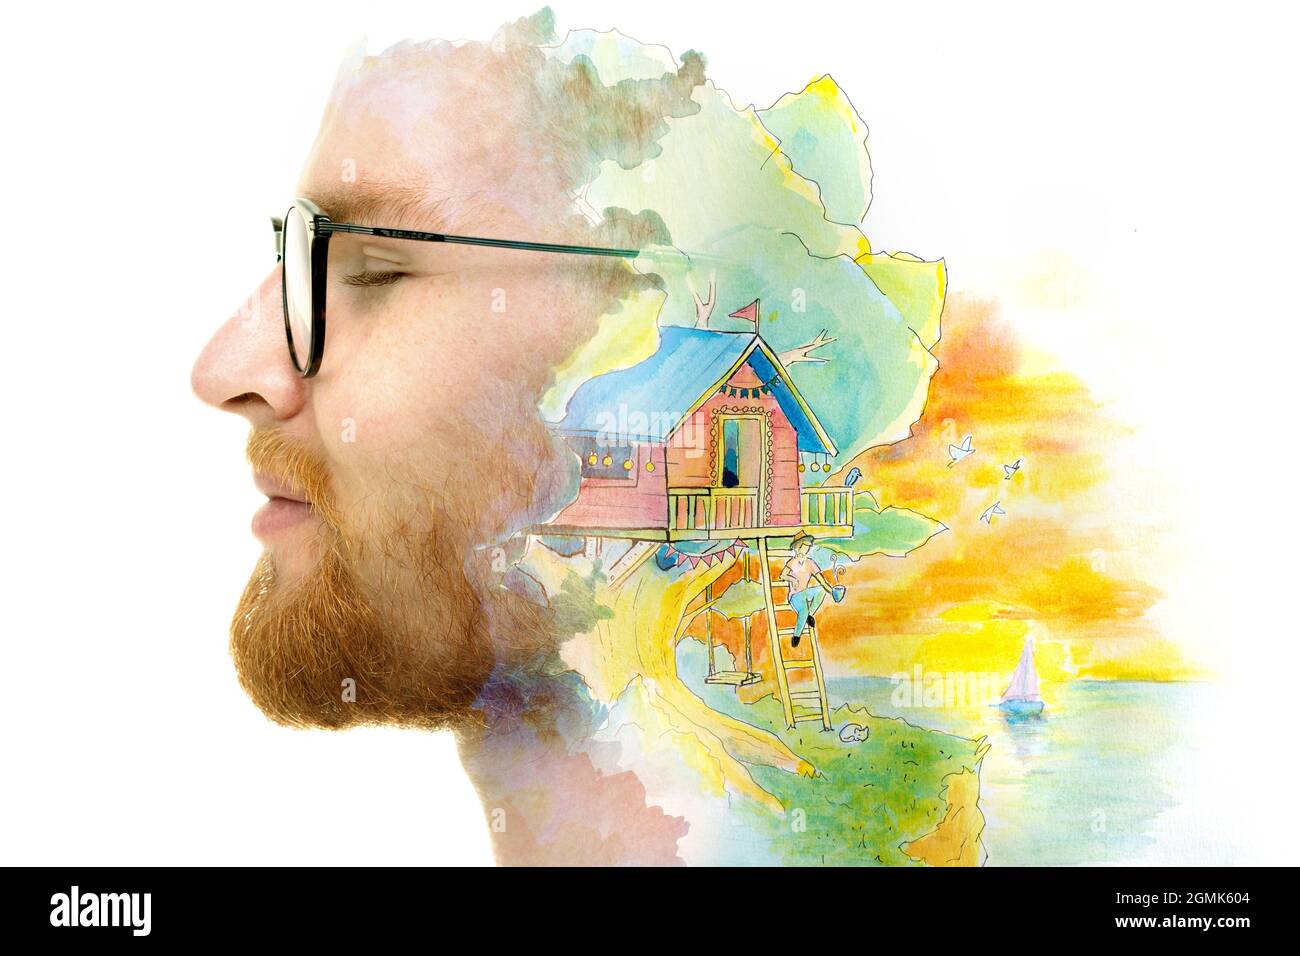 A profile portrait of a man combined with a painting in a double exposure technique. Stock Photo